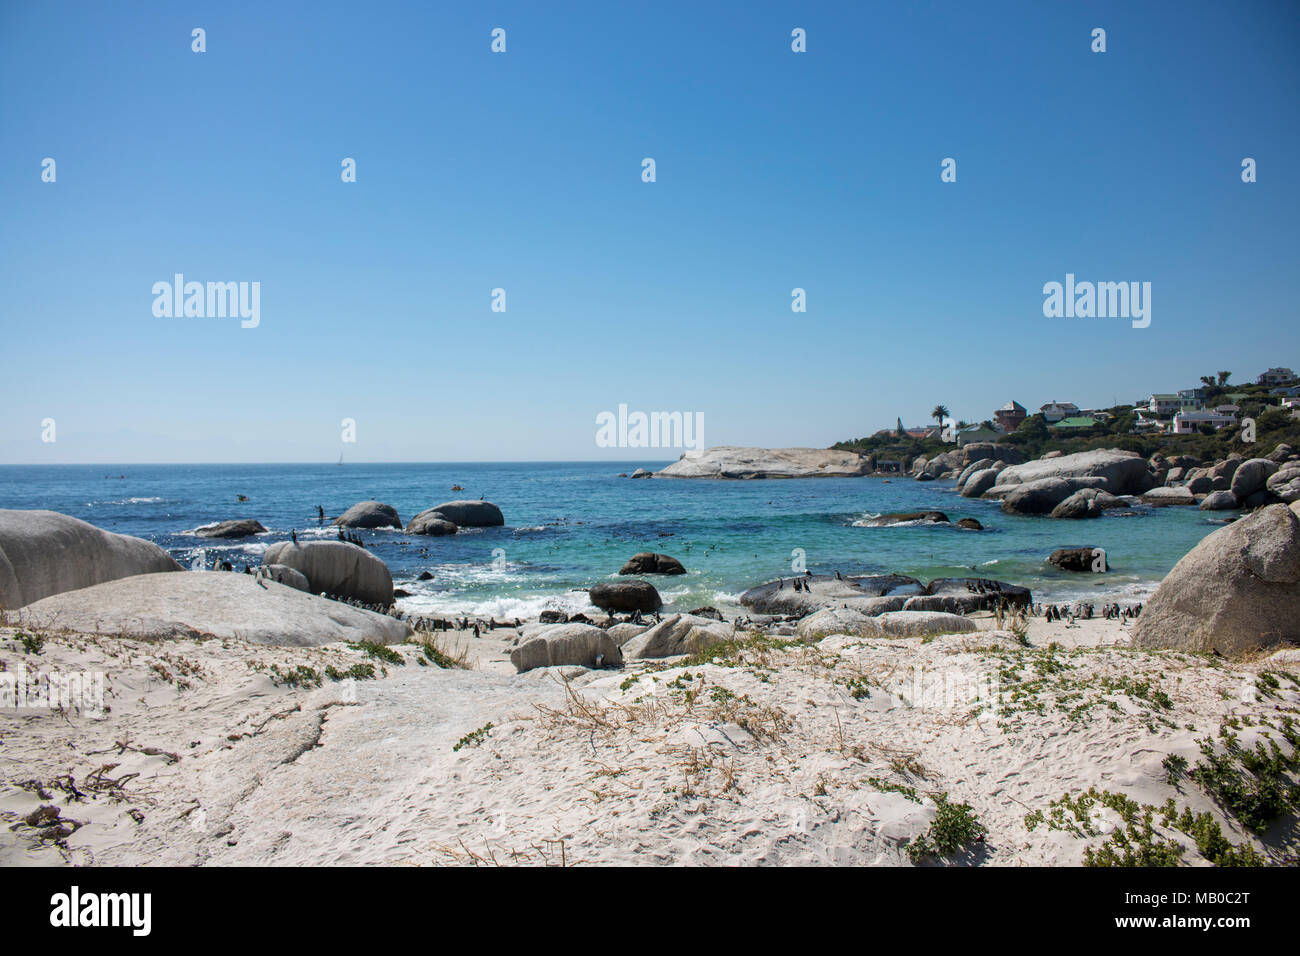 Penguins at the beach in a sunny day in South Africa Stock Photo